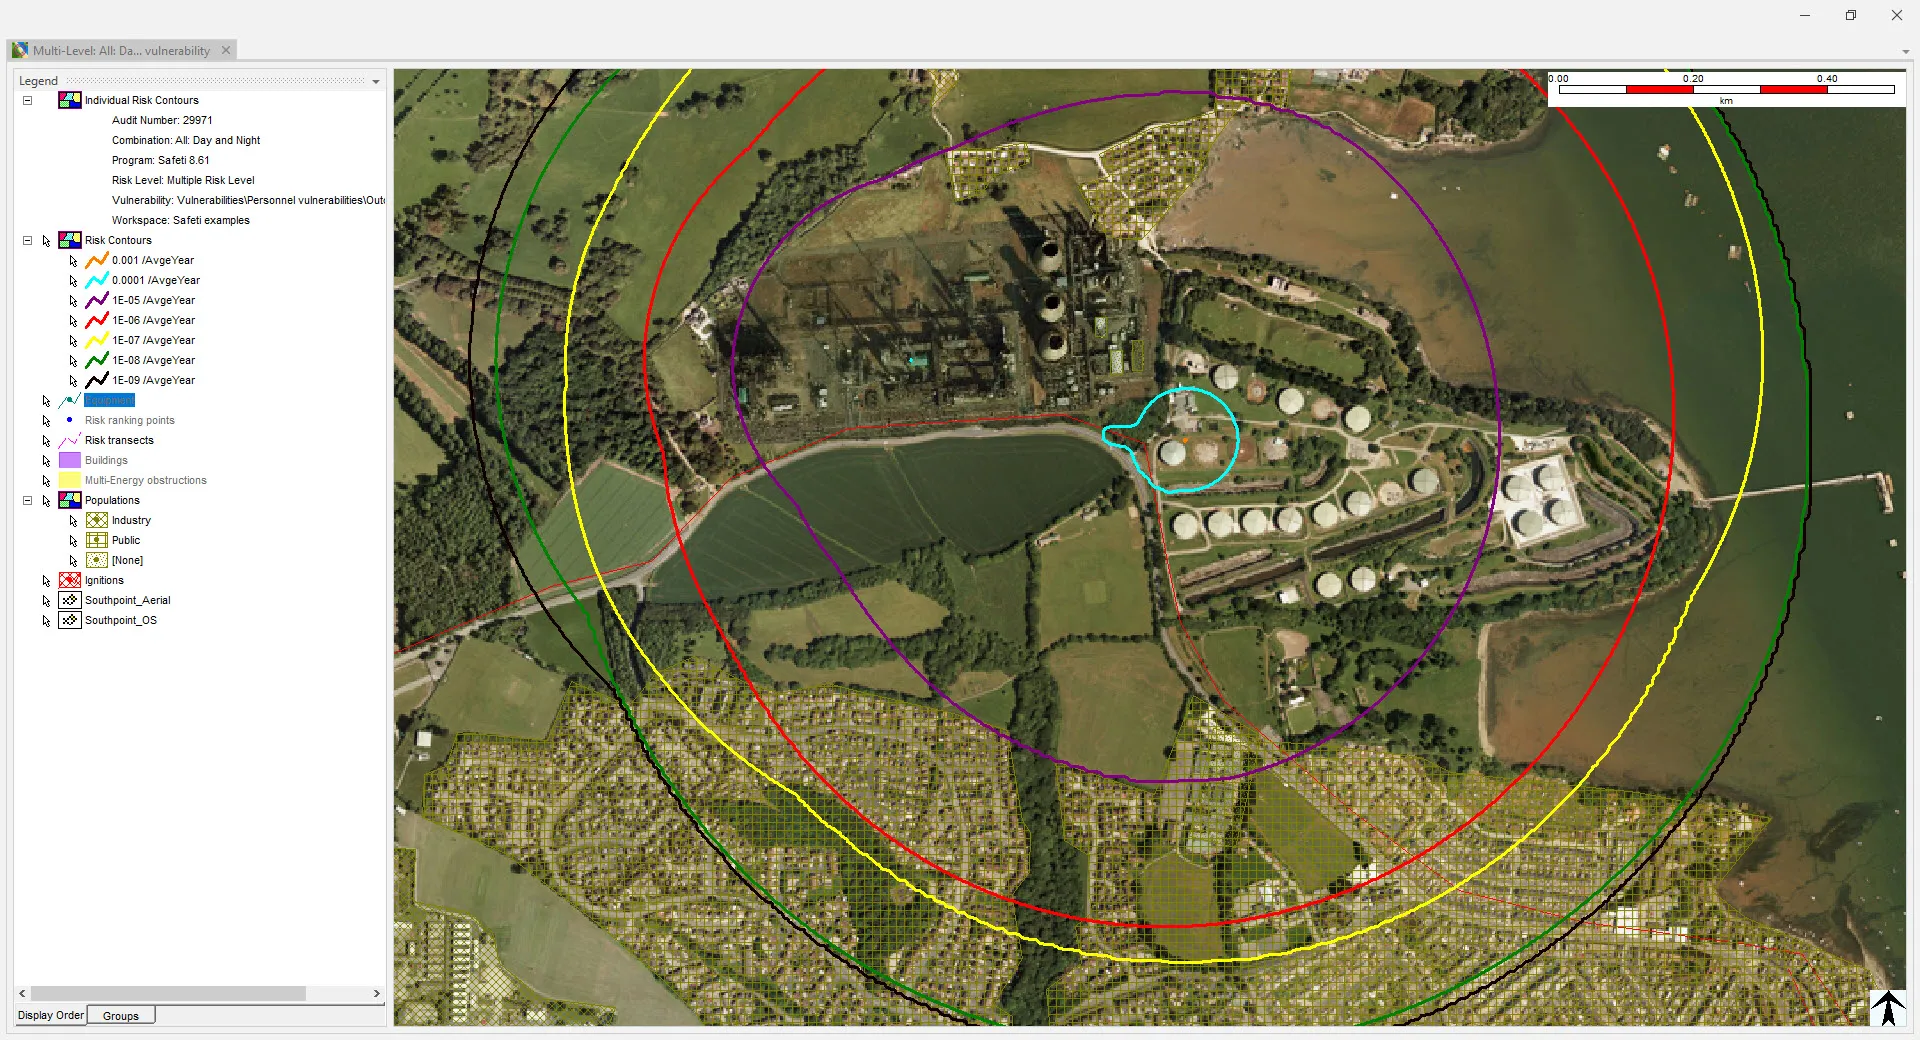 Screenshot from Safeti software, showing individual risk contours in a GIS view of a facility